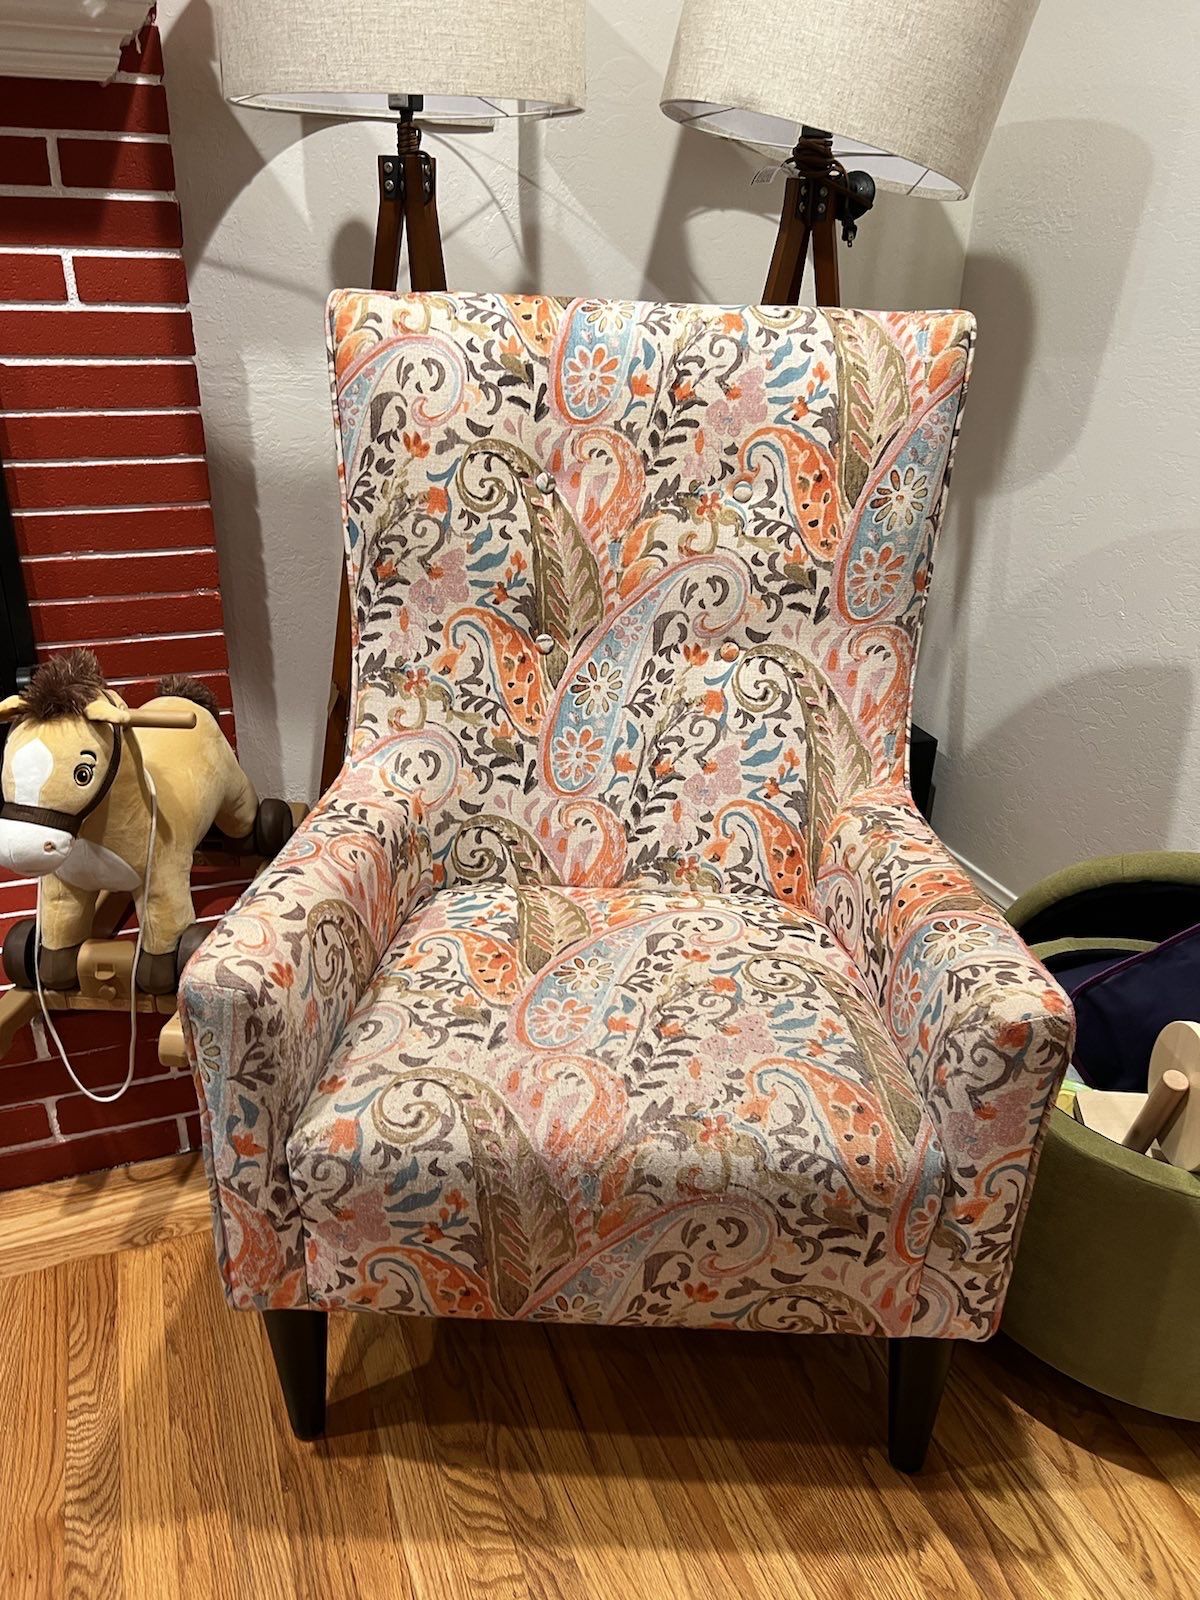 22.5” Wingback Chair